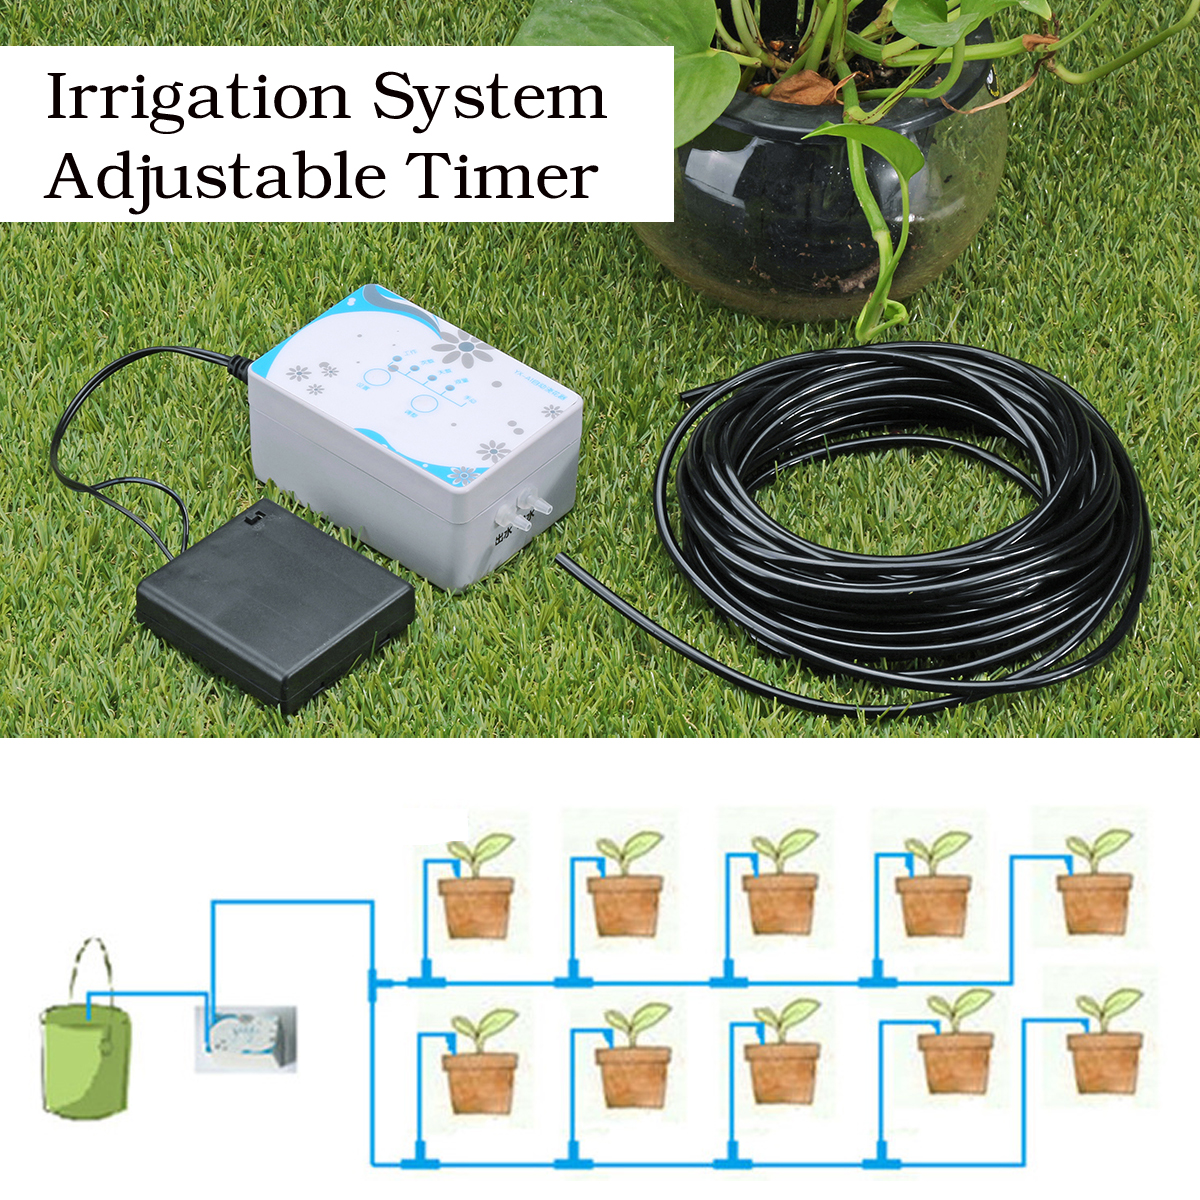 Drip-Irrigation-Watering-Timer-System-Adjustable-BatteryRechargeable-Controller-10m-Tube-1572080-3